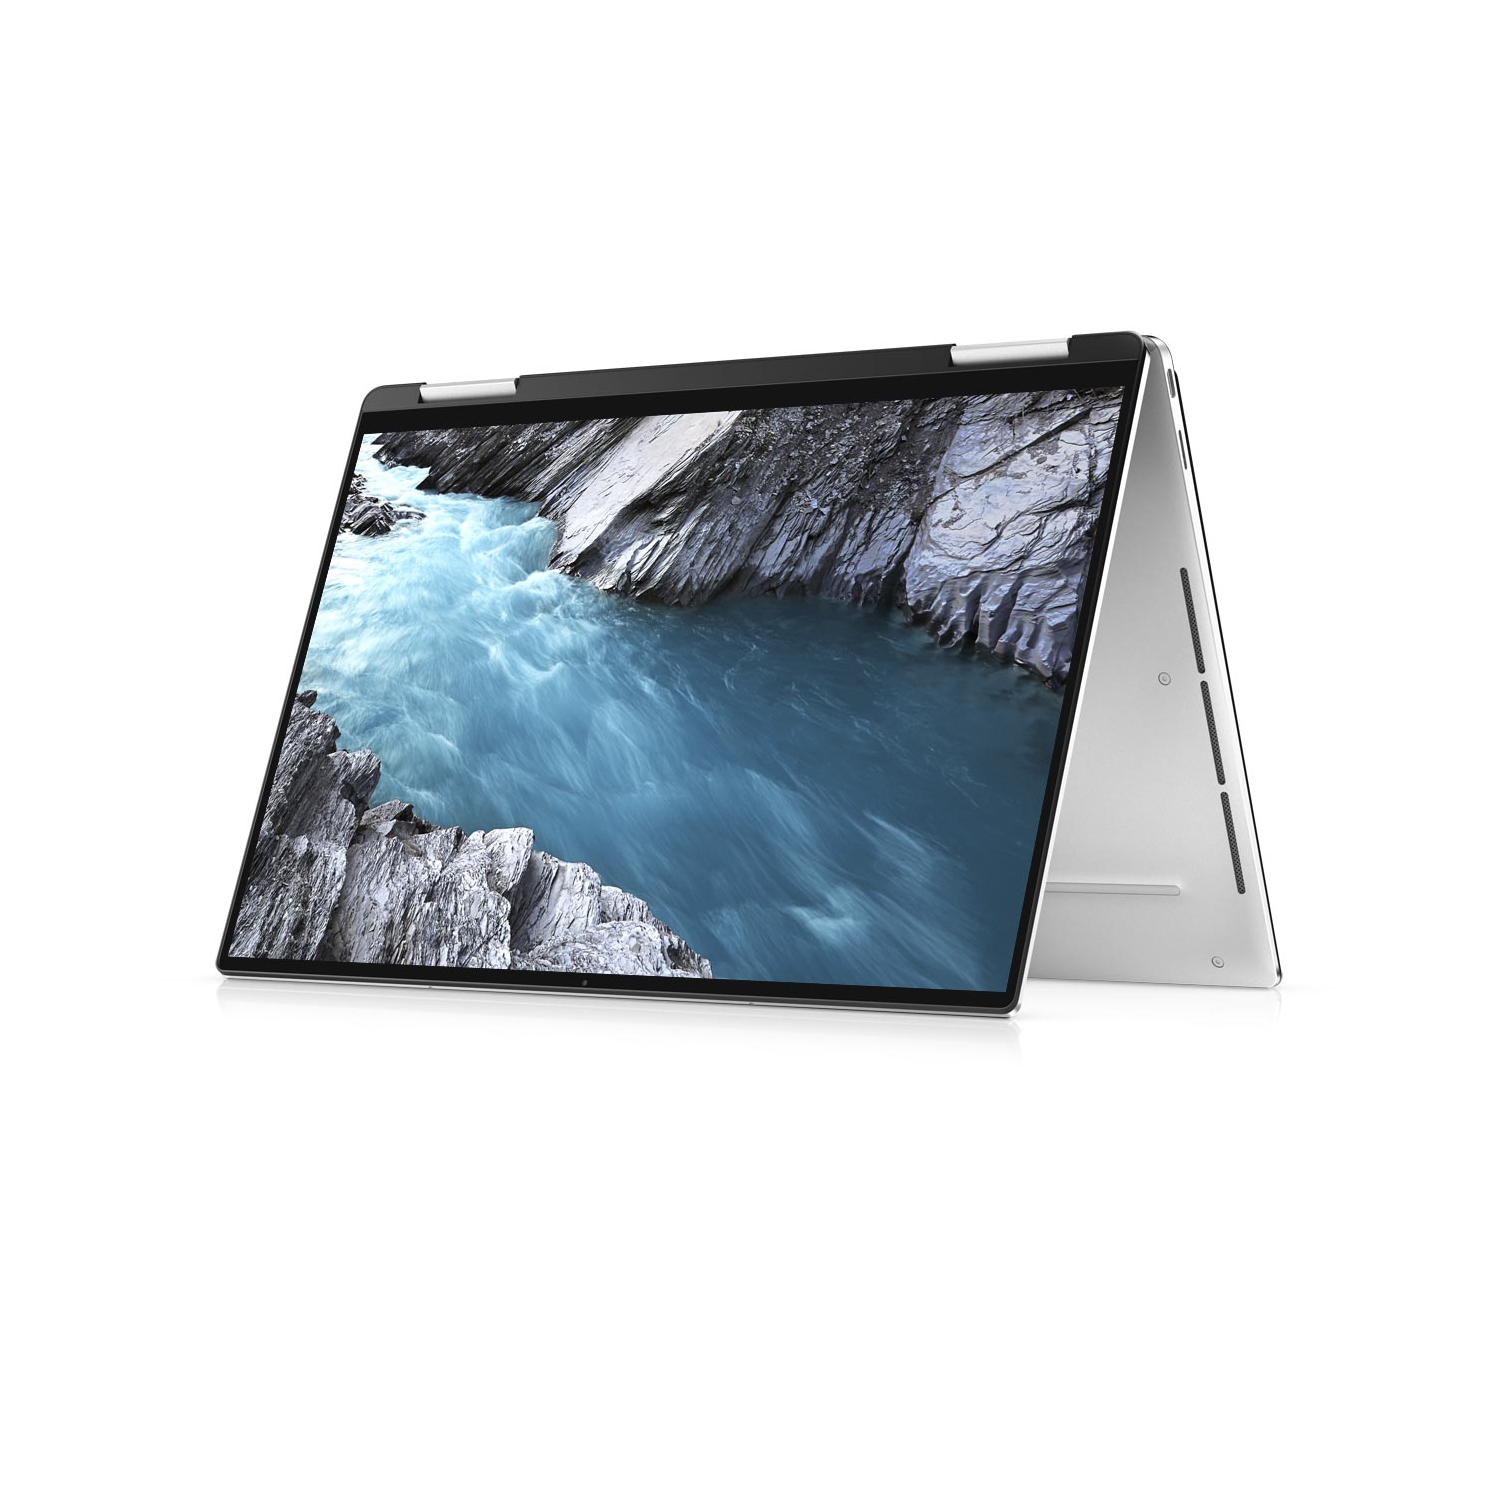 Refurbished (Excellent) - Dell XPS 13 7390 2-in-1 (2019) | 13.4" FHD+ Touch | Core i3 - 256GB SSD - 4GB RAM | 2 Cores @ 3.4 GHz - 10th Gen CPU Certified Refurbished